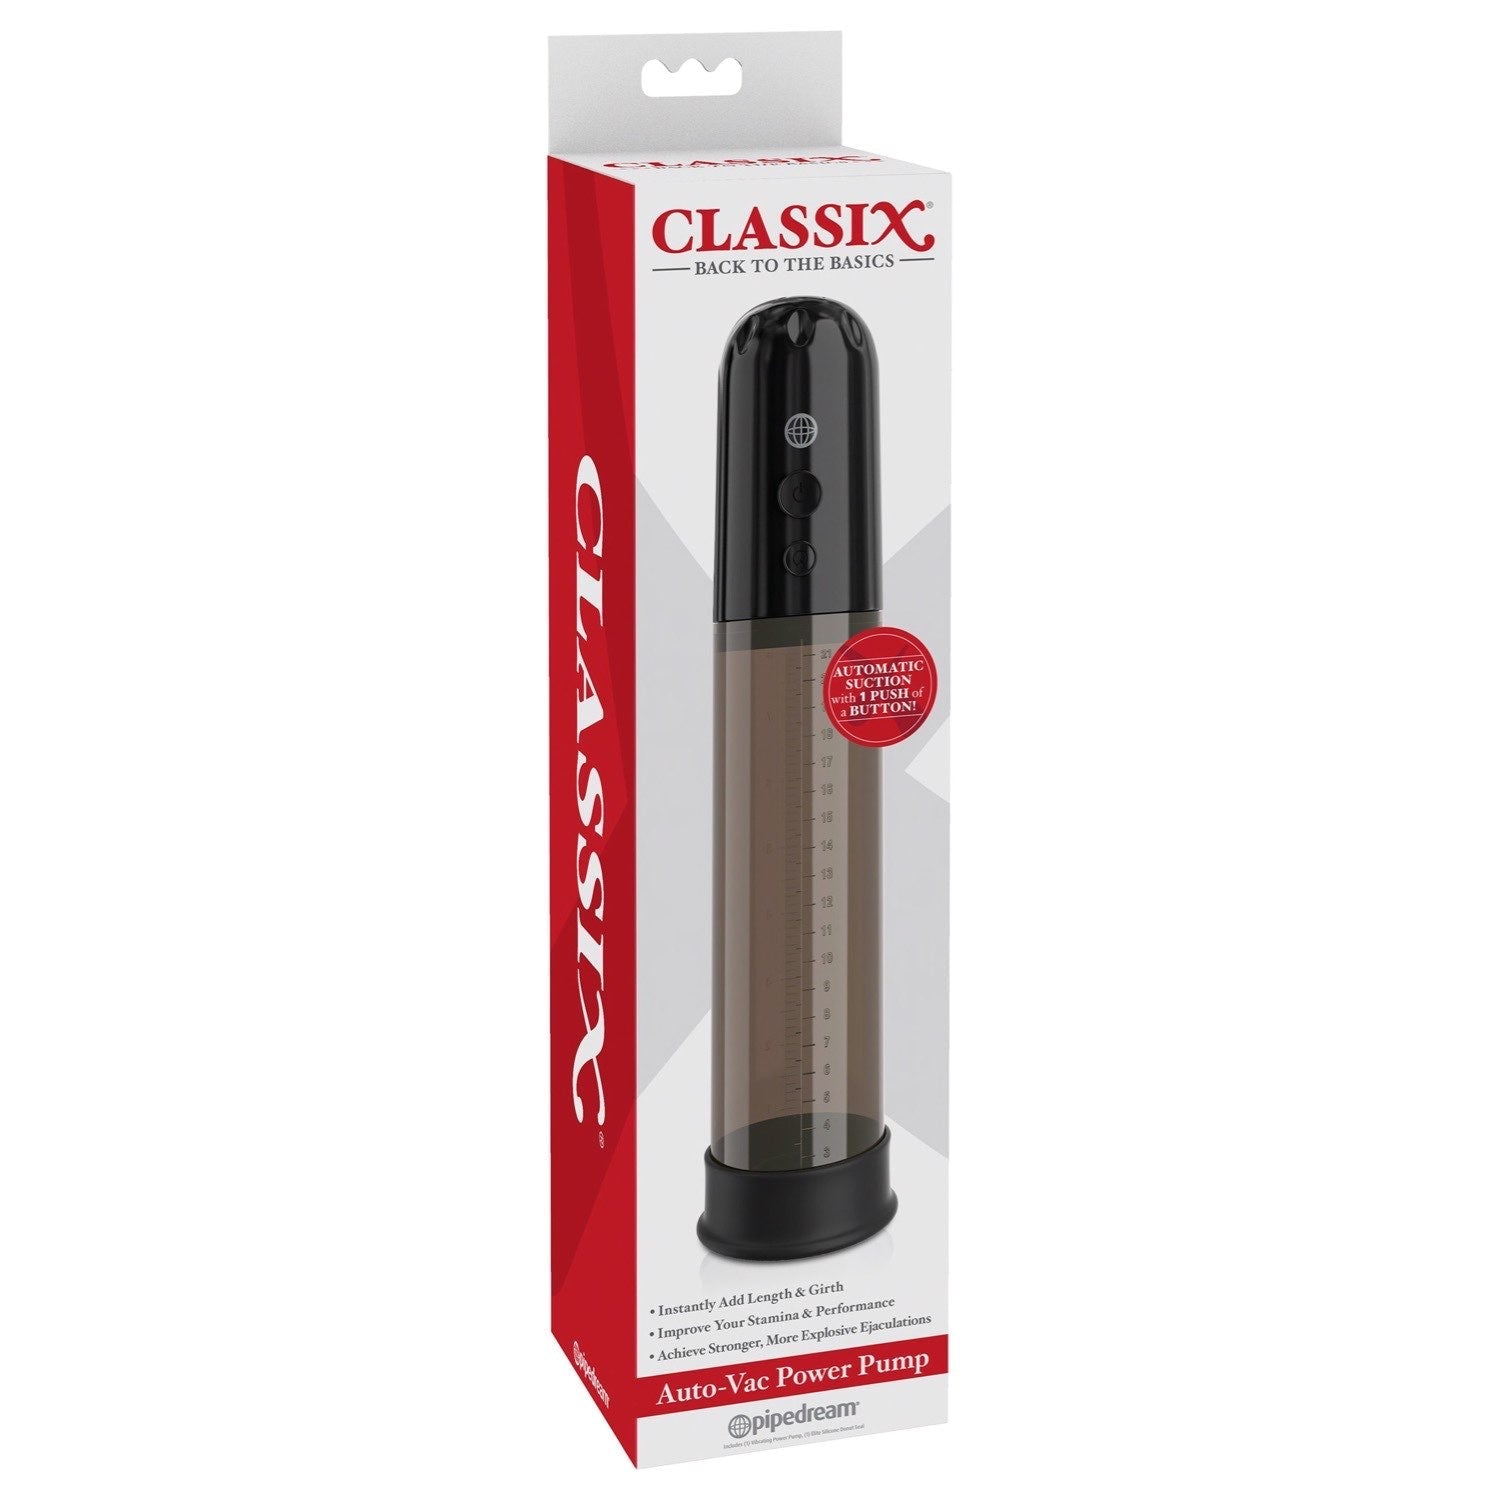 Classix Auto-Vac Power Pump - Black Powered Penis Pump by Pipedream